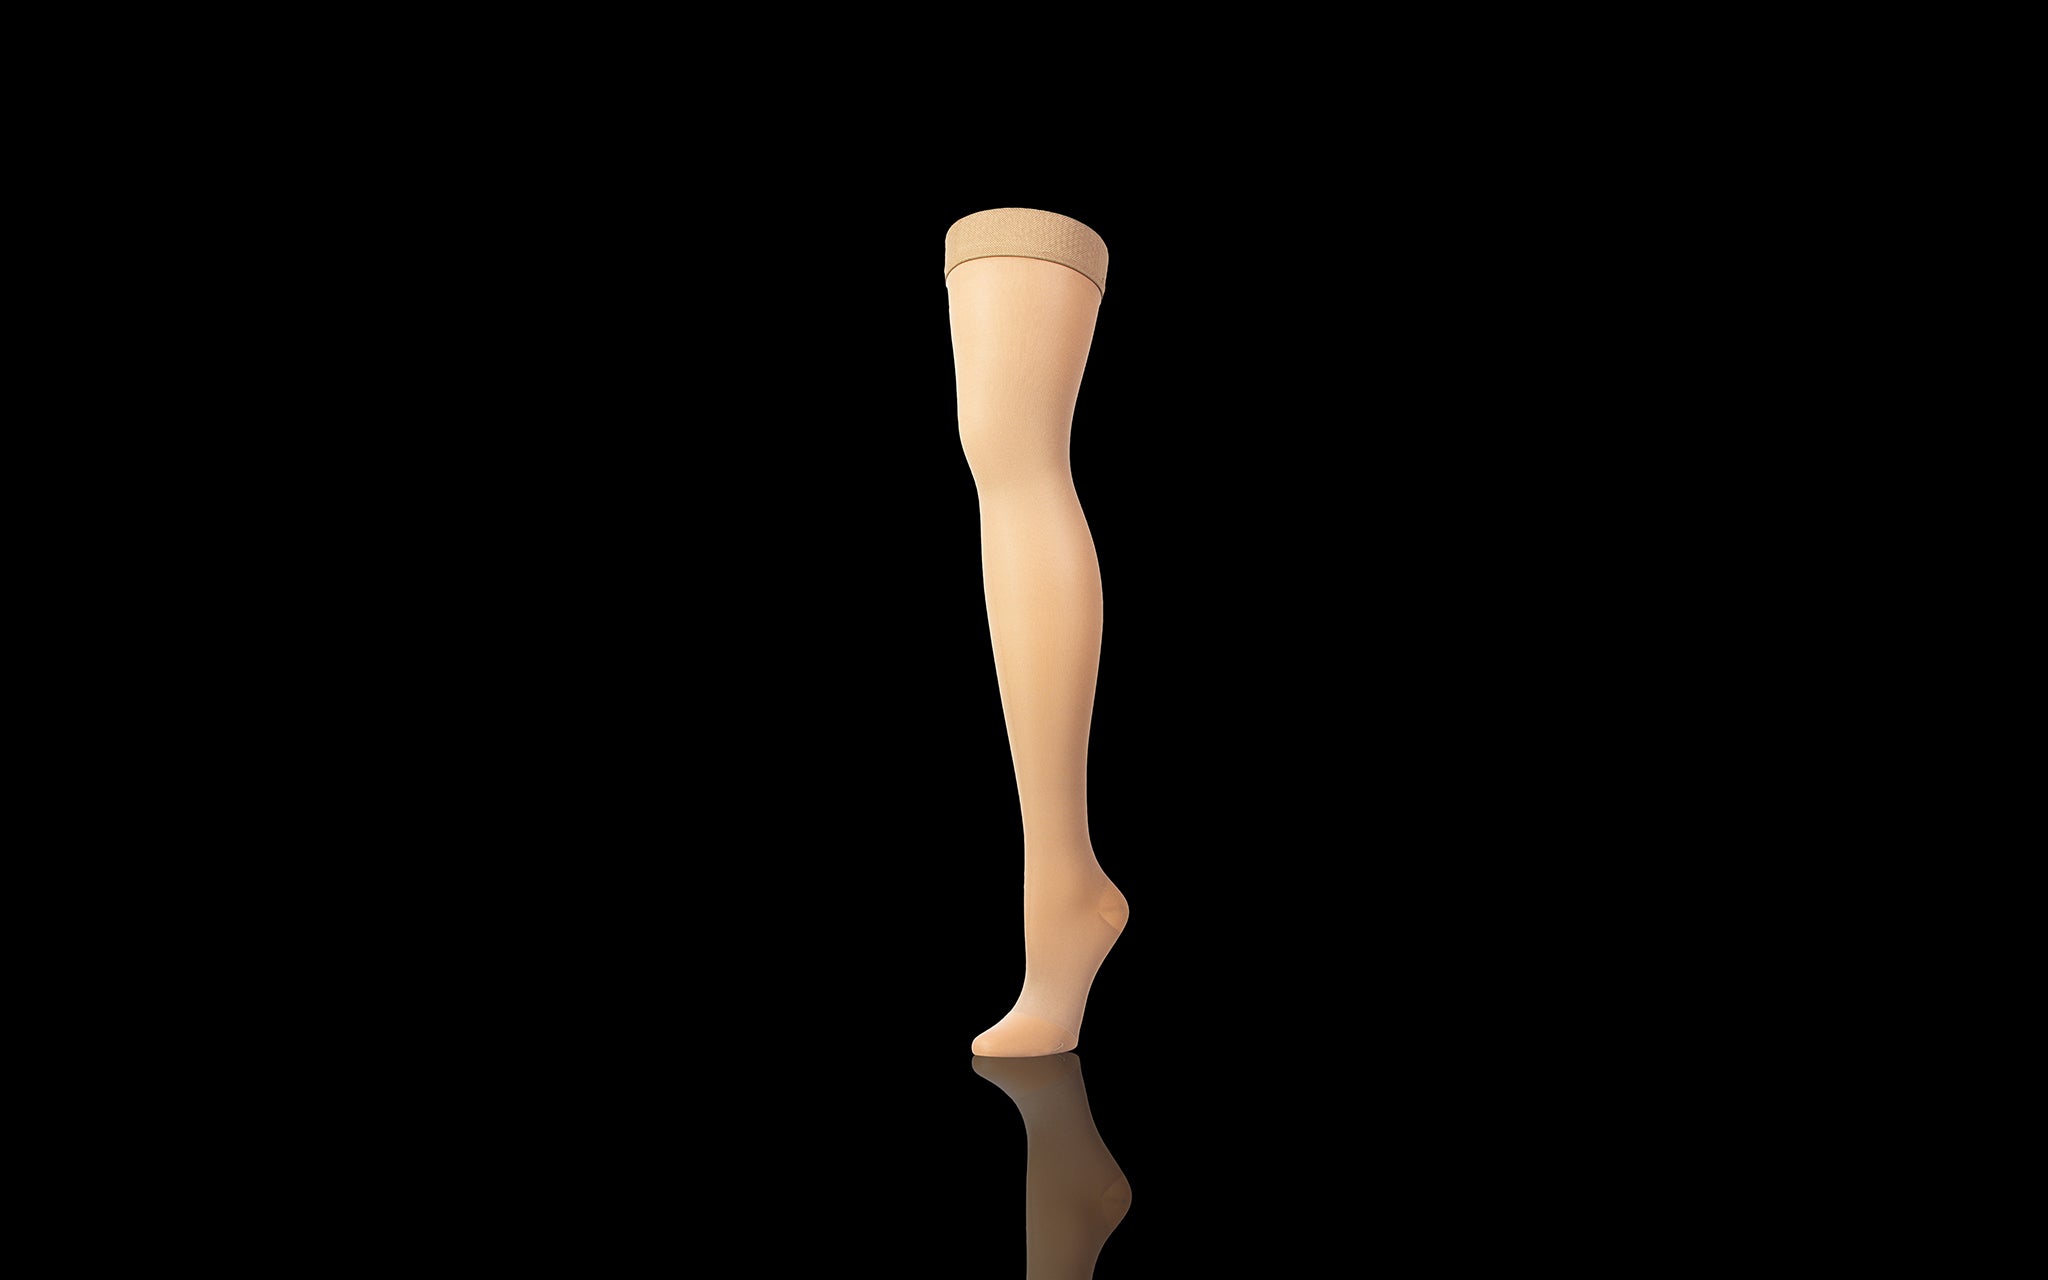 Compression Socks Guide: Image Of Beige Thigh High Stockings With Black Background